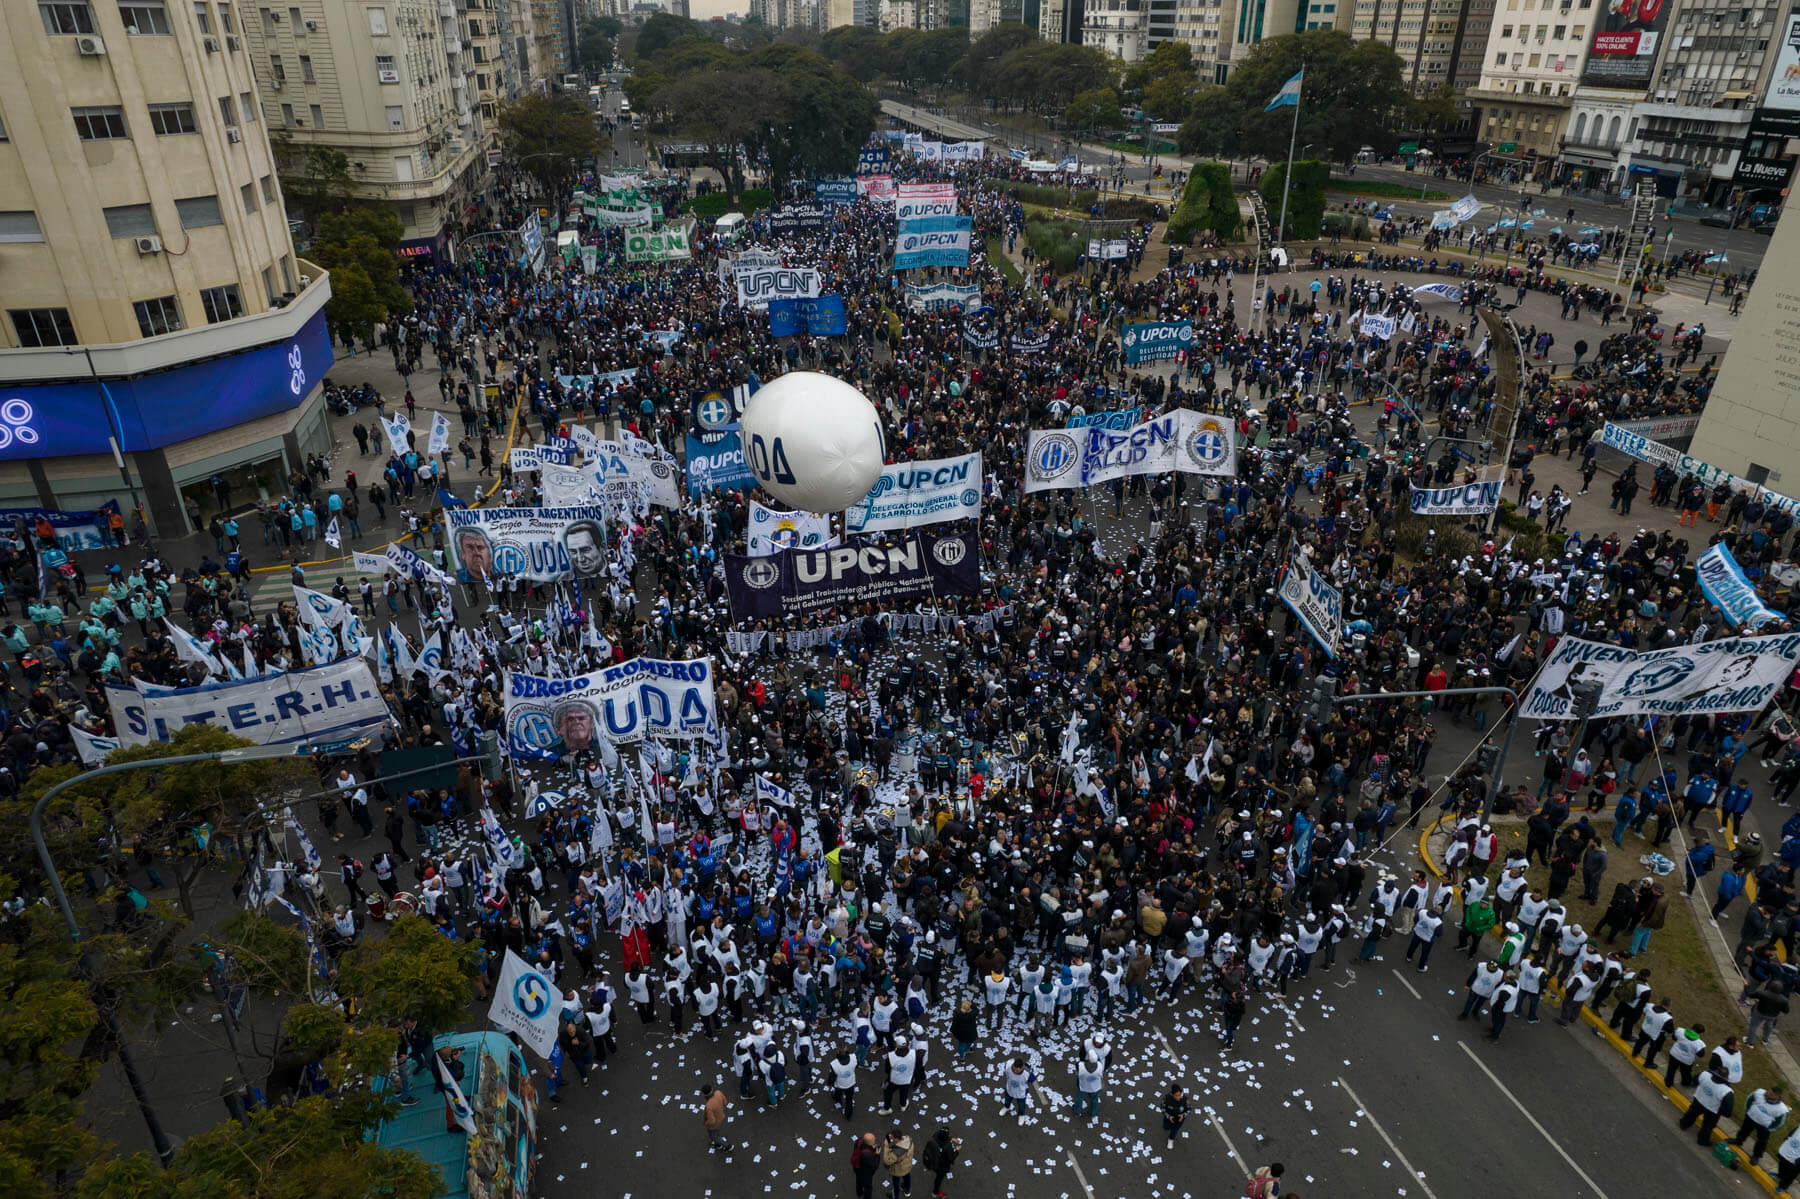 Argentine Protesters Demand Government Action to Tame “Intolerable” Inflation